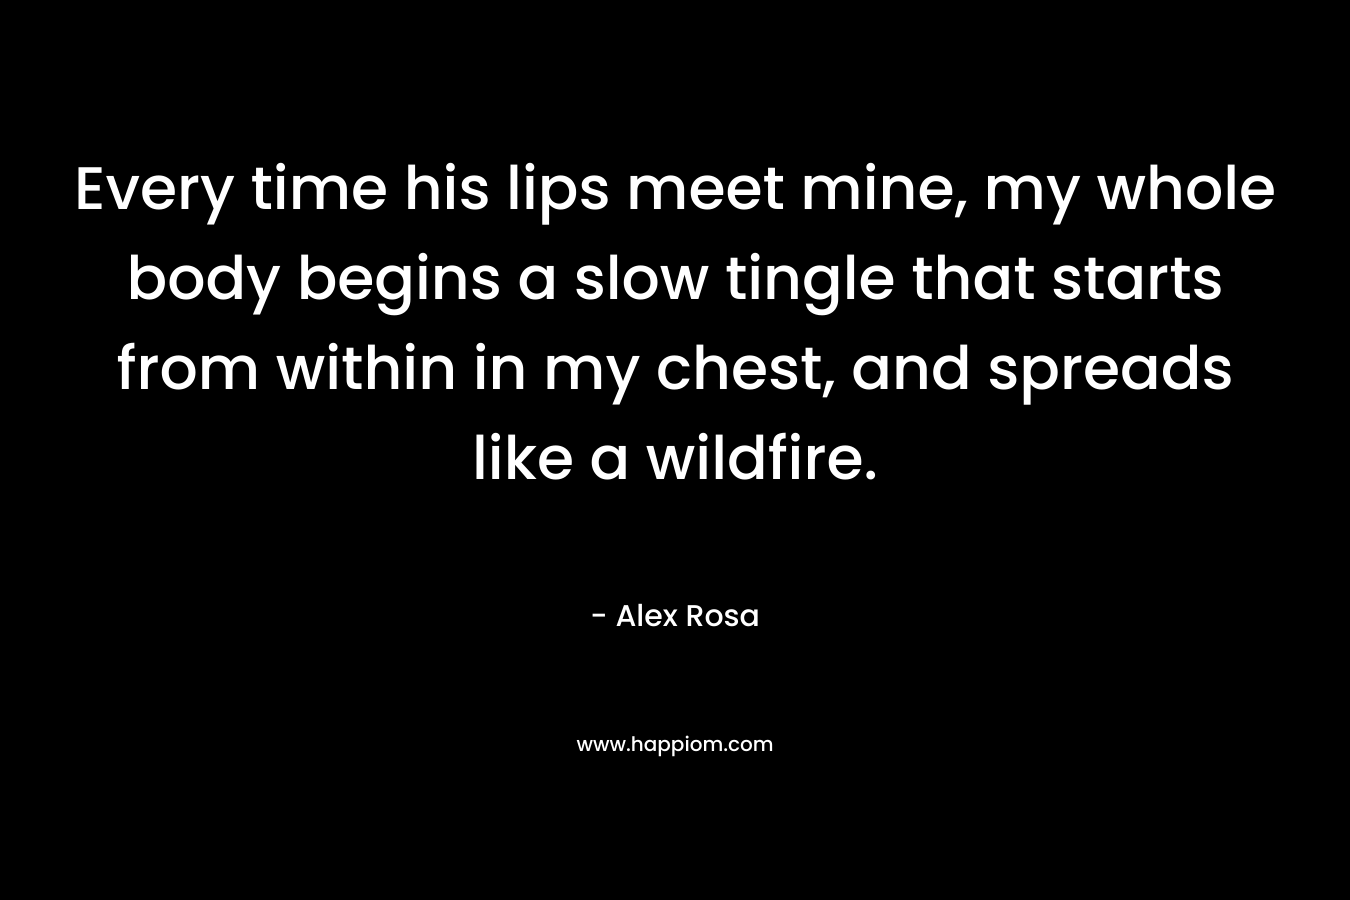 Every time his lips meet mine, my whole body begins a slow tingle that starts from within in my chest, and spreads like a wildfire. – Alex Rosa